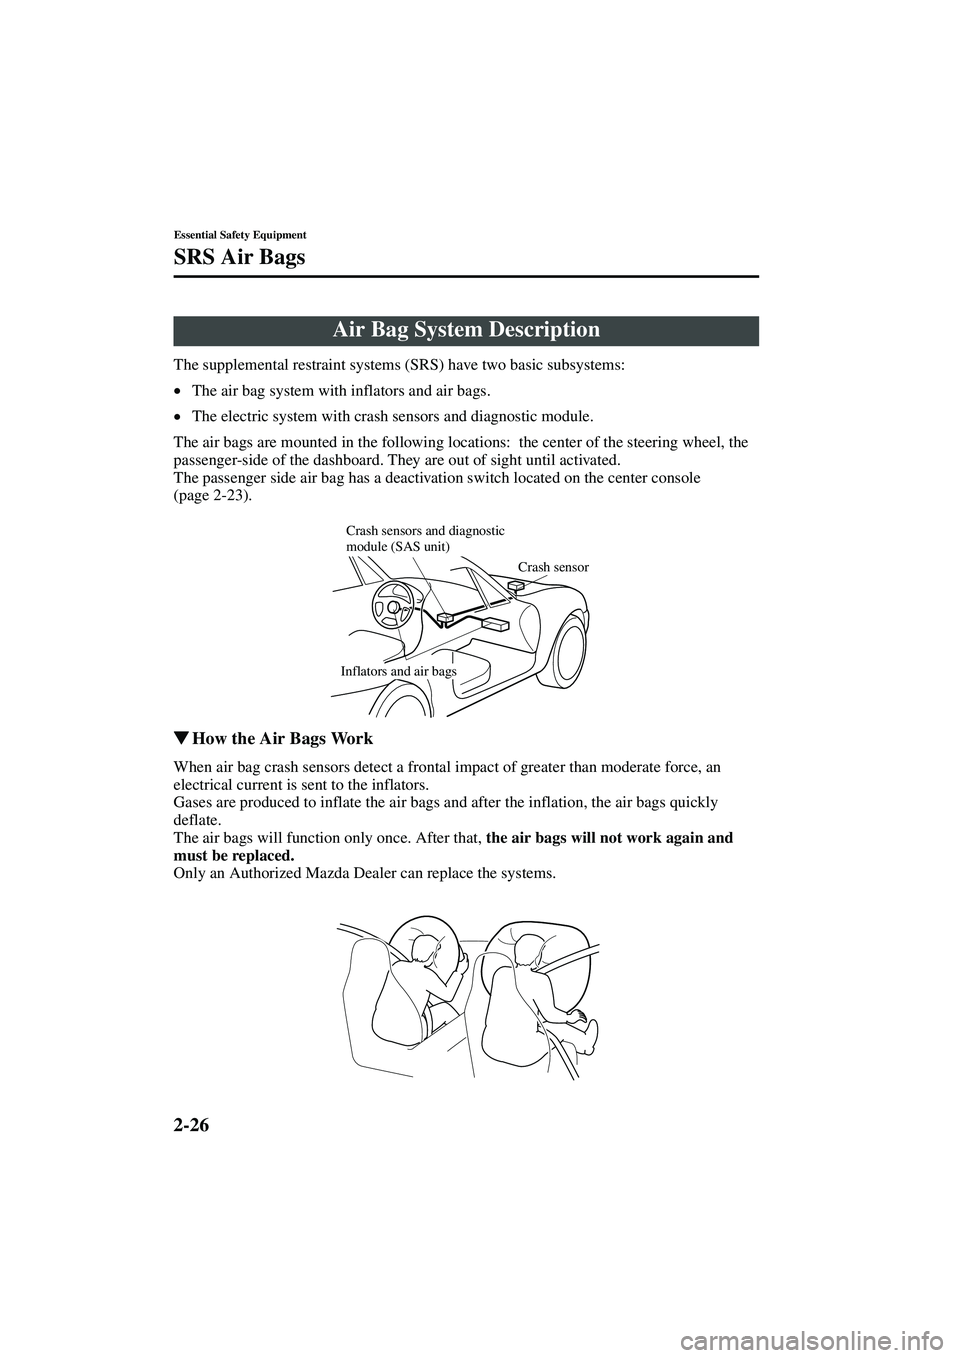 MAZDA MODEL MX-5 MIATA 2003 Owners Guide 2-26
Essential Safety Equipment
SRS Air Bags
Form No. 8R09-EA-02G
The supplemental restraint systems (SRS) have two basic subsystems:
•The air bag system with inflators and air bags.
• The electri